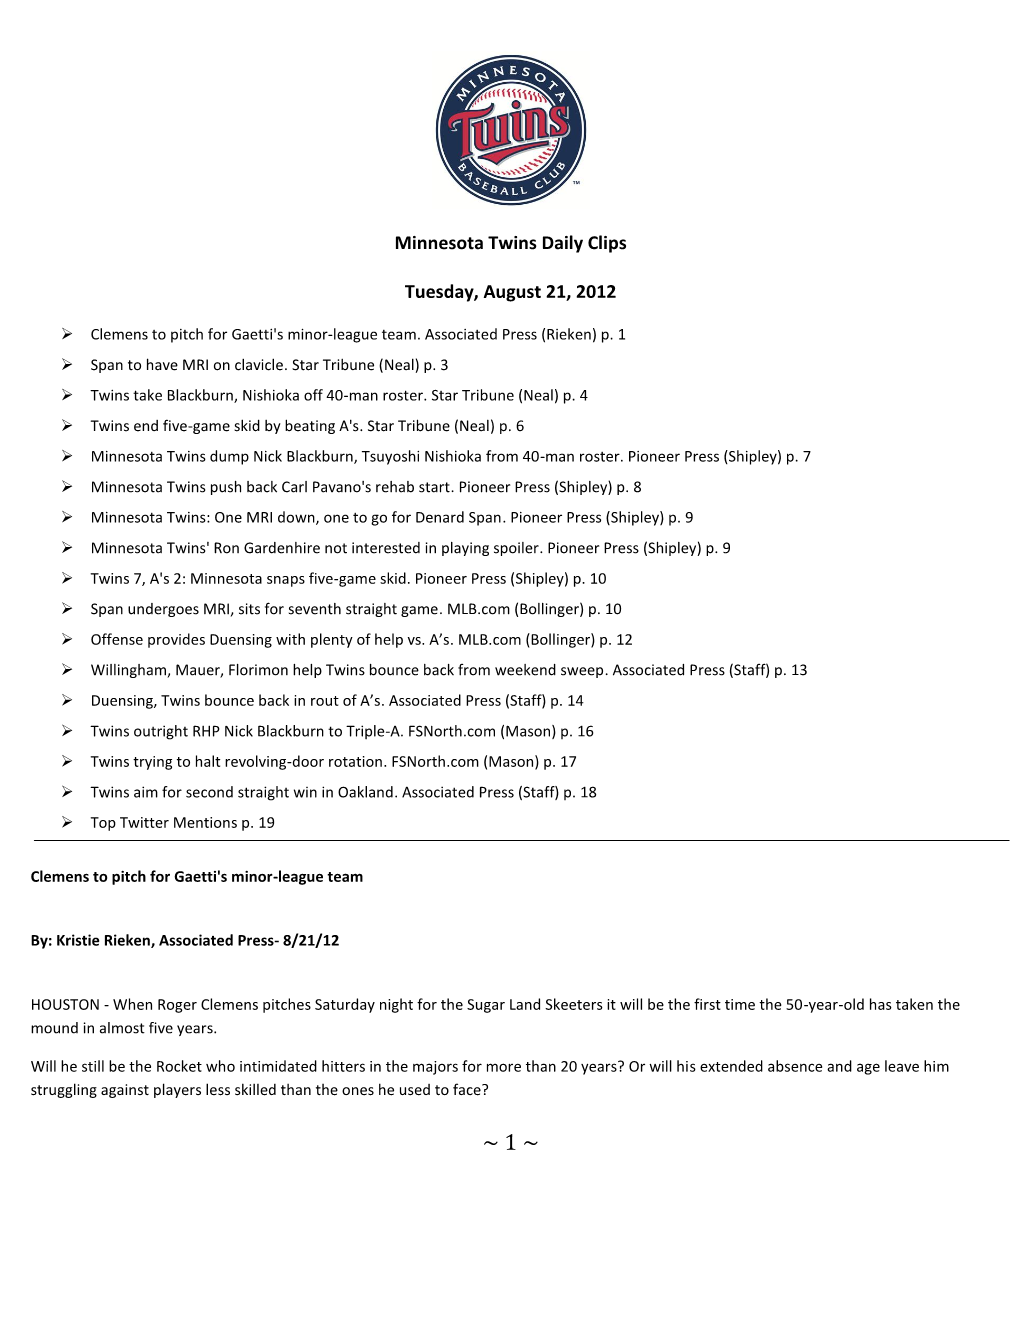 Minnesota Twins Daily Clips Tuesday, August 21, 2012